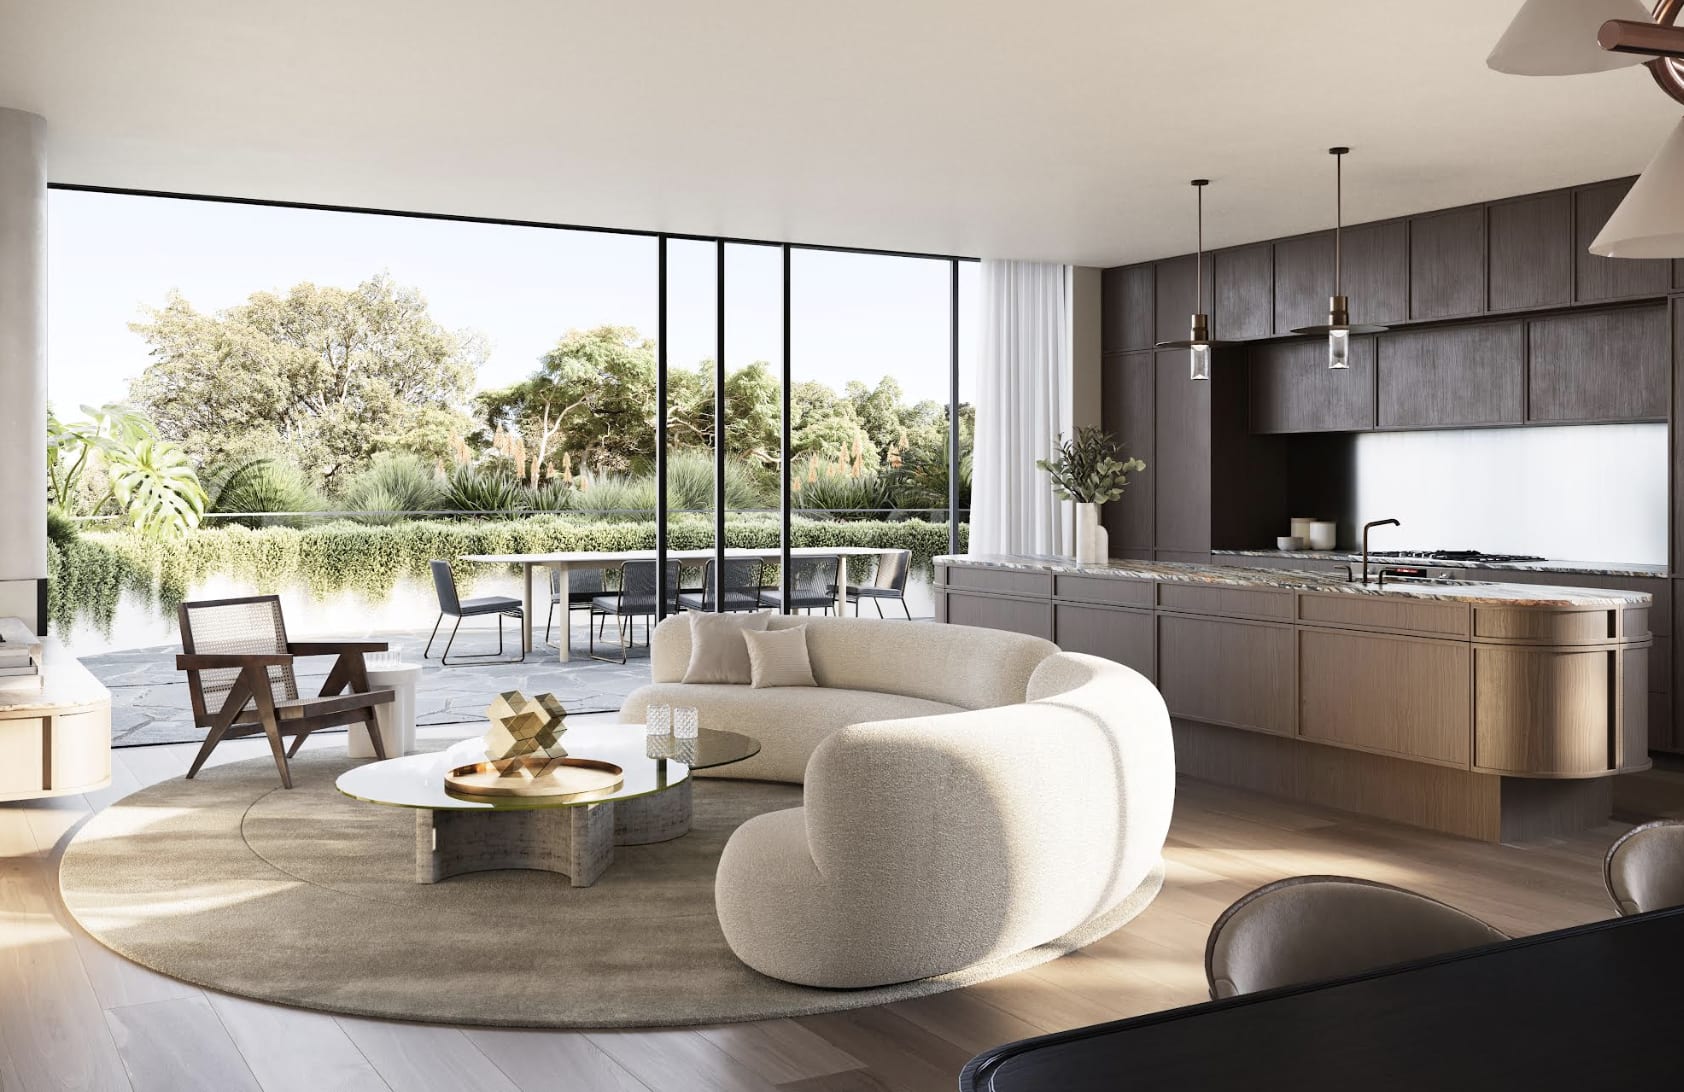 Rare Luigi Rosselli apartments in Bellevue Hill snapped up pre-launch